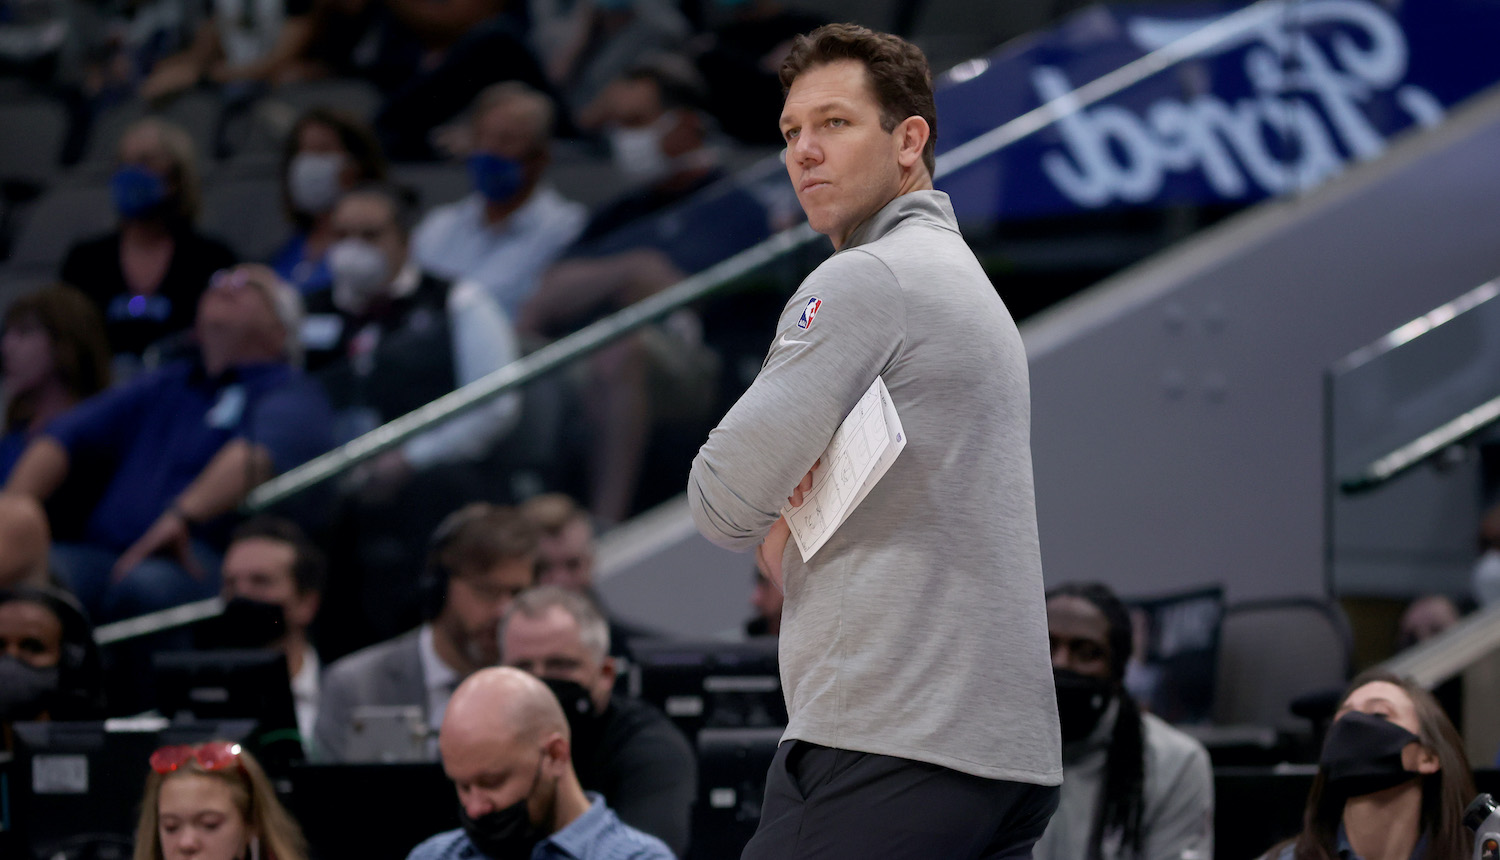 DALLAS, TEXAS - OCTOBER 31: Head coach Luke Walton of the Sacramento Kings looks on as the Kings take on the Dallas Mavericks at American Airlines Center on October 31, 2021 in Dallas, Texas. NOTE TO USER: User expressly acknowledges and agrees that, by downloading and or using this photograph, User is consenting to the terms and conditions of the Getty Images License Agreement. (Photo by Tom Pennington/Getty Images)